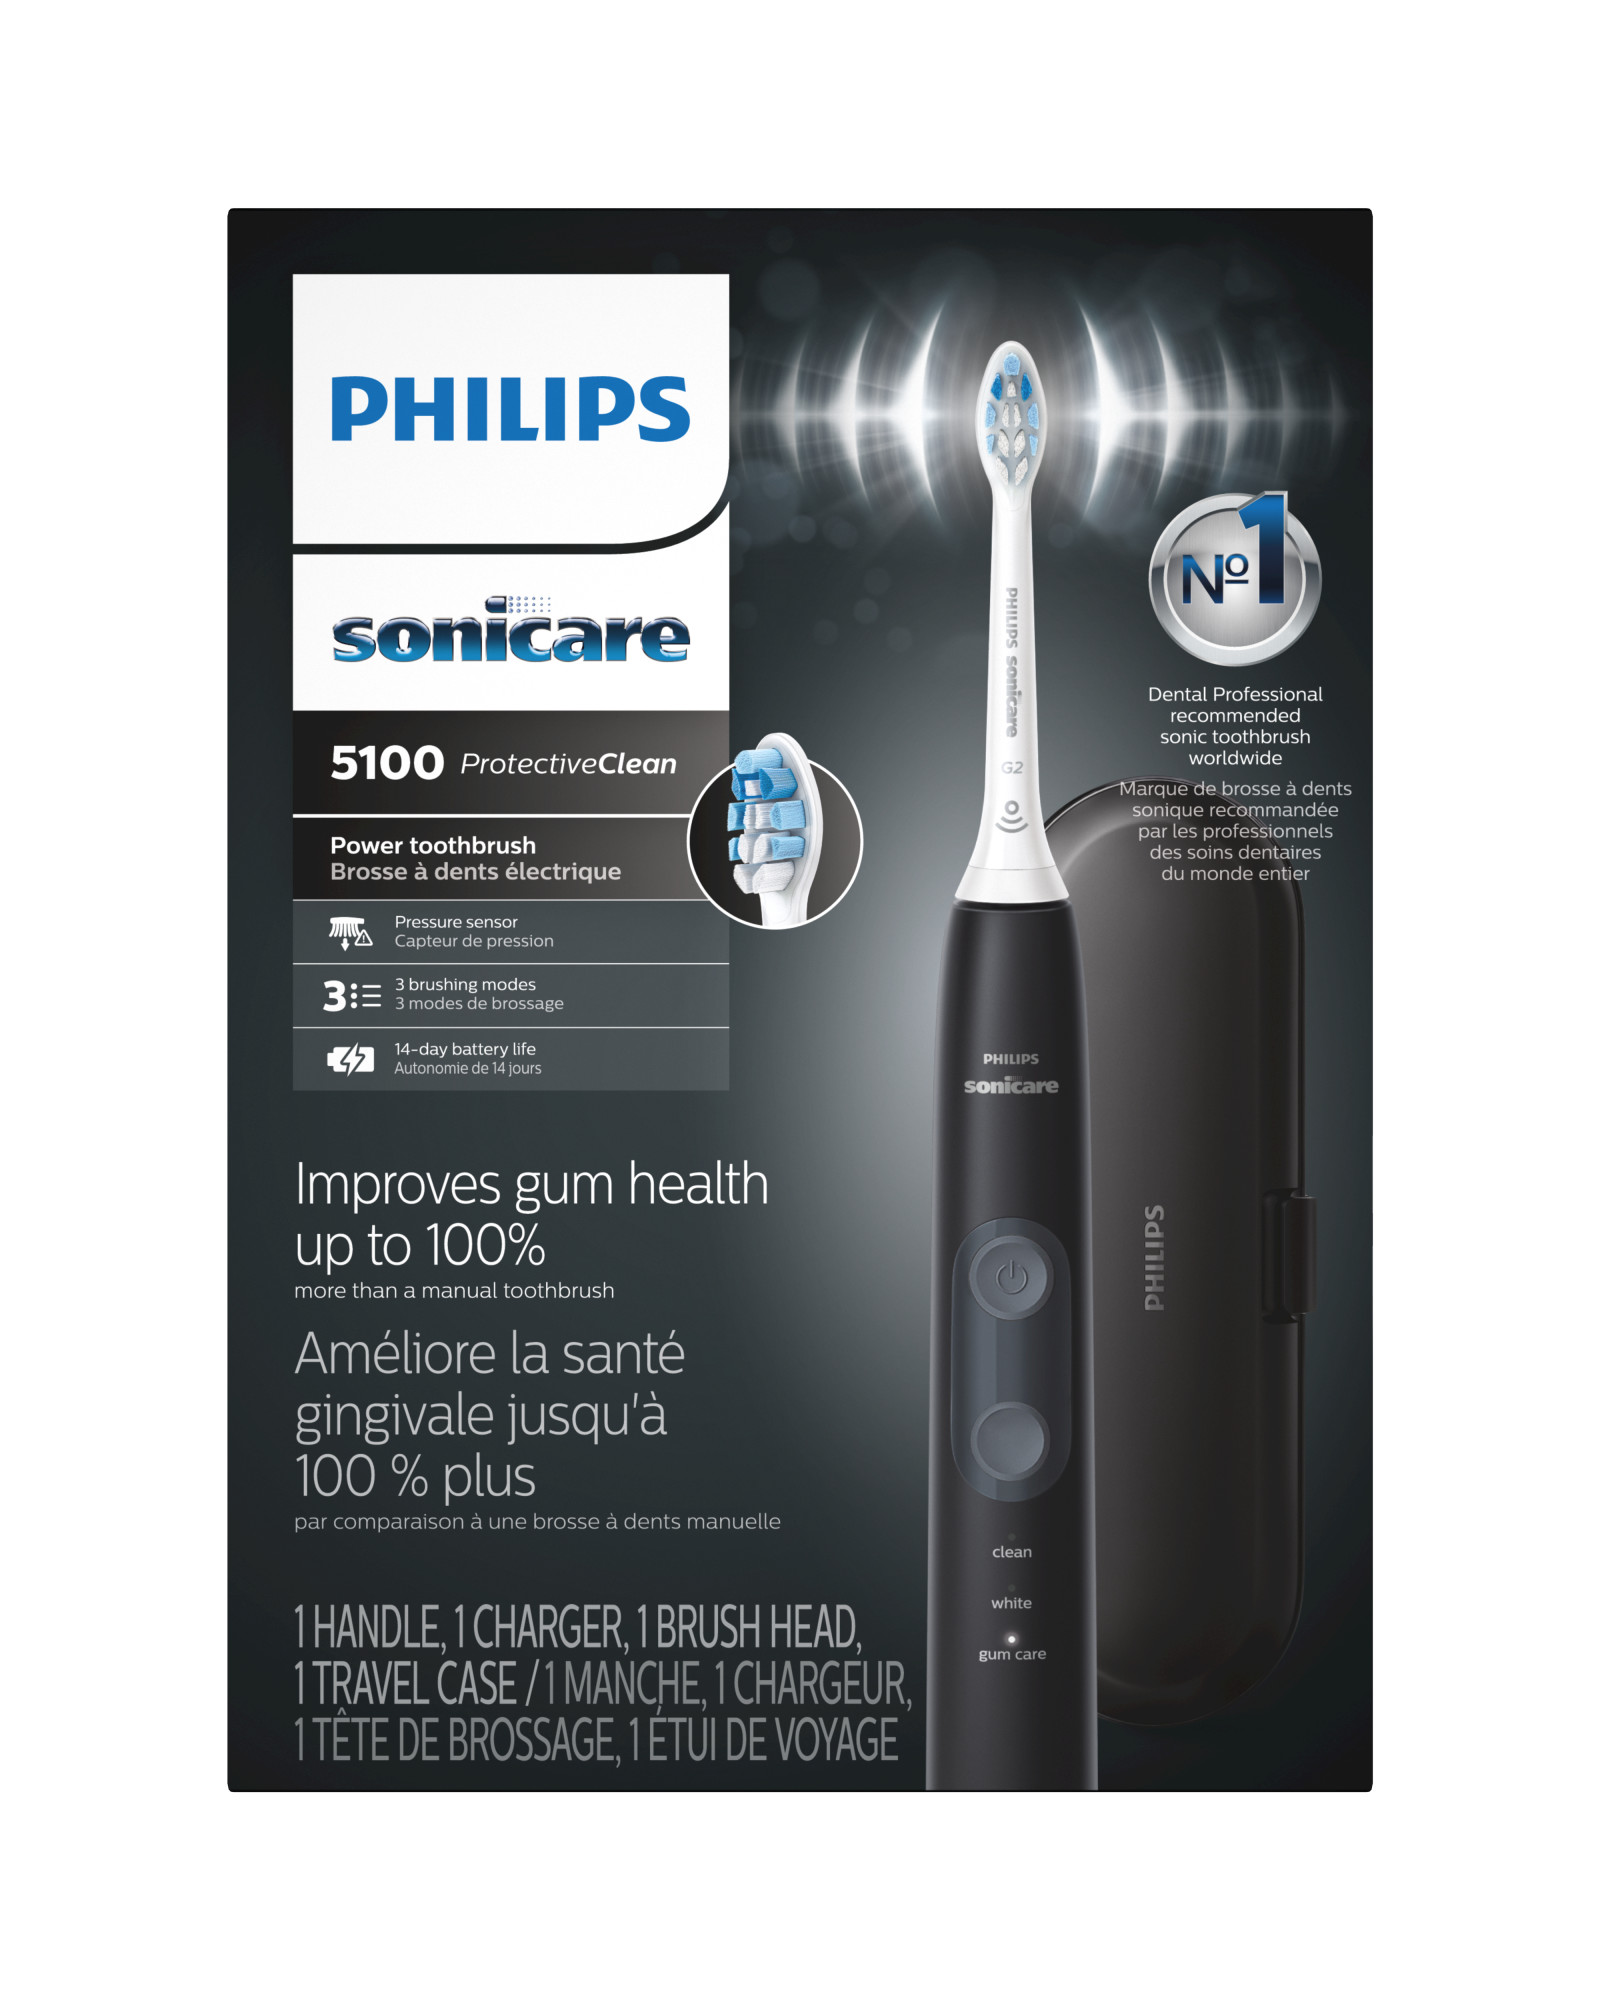 Philips Sonicare ProtectiveClean 5100 Rechargeable Electric Toothbrush, Black Hx6850/60 - image 4 of 5